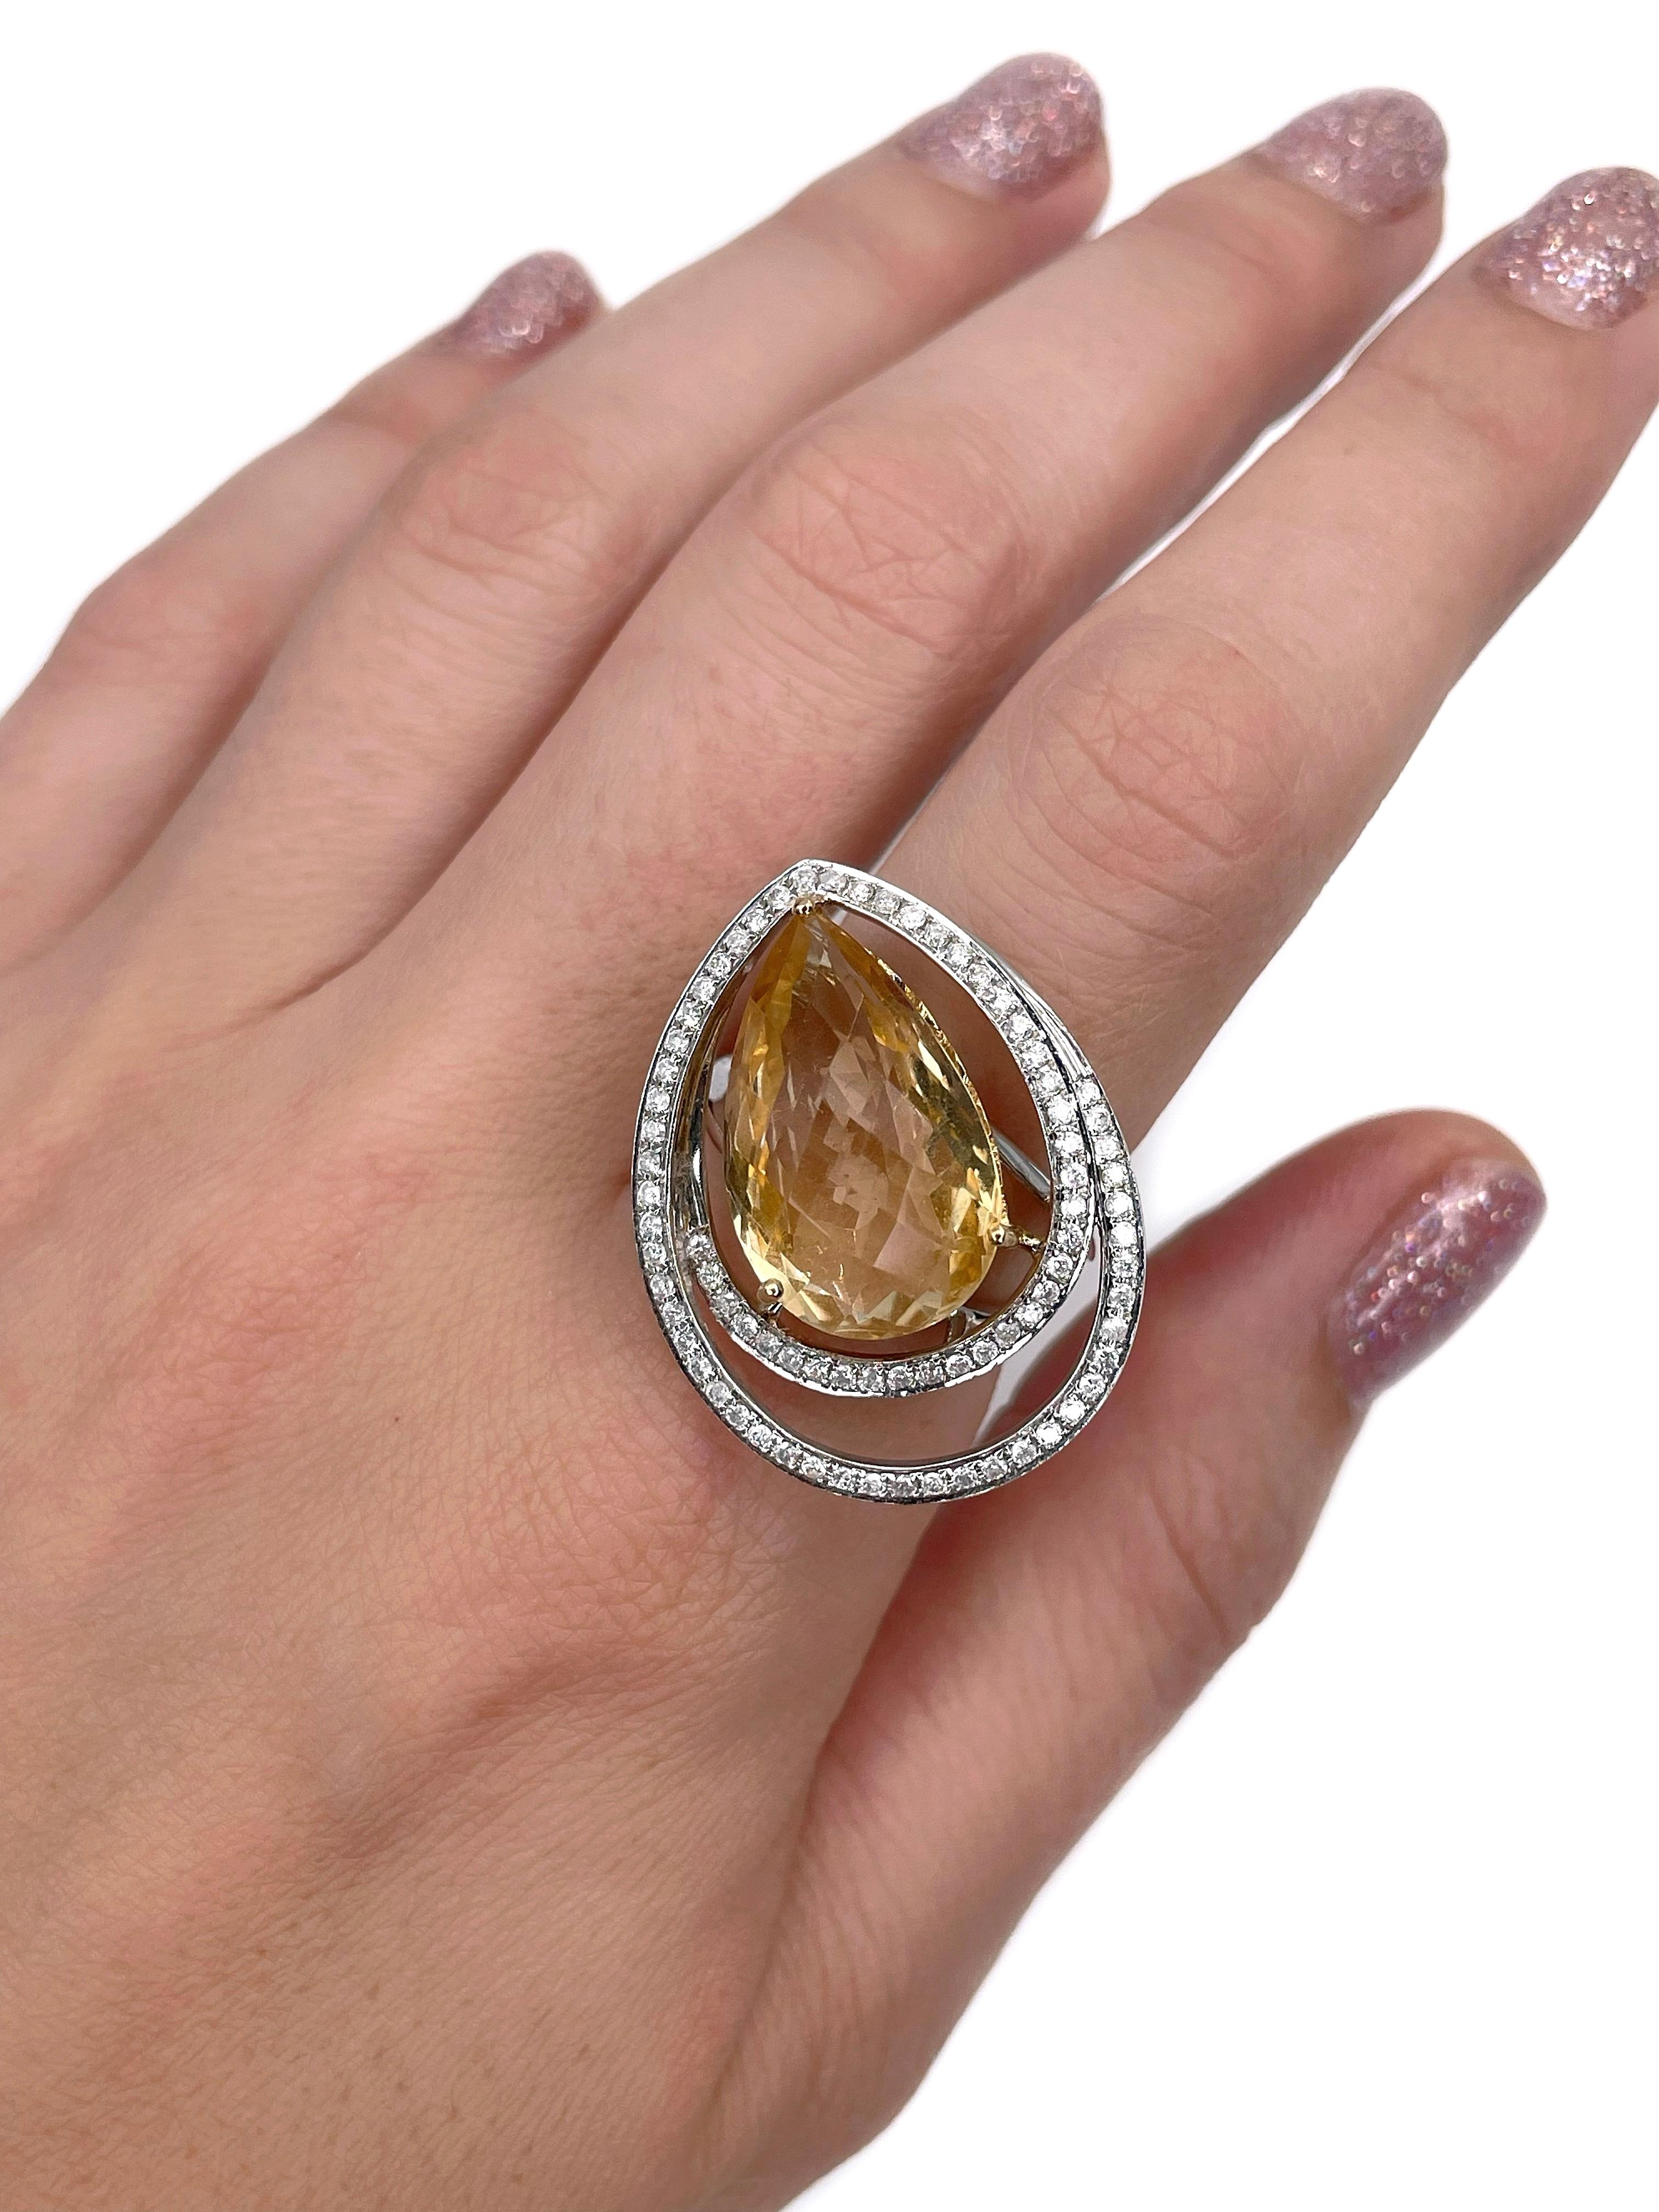 This is a gorgeous modern design cocktail ring crafted in 18K white gold. Circa 2000. 

The piece features:
- 1 citrine (pear cut, 10.70ct, Y 2/2, VS)
- 77 diamonds (round brilliant cut, TW 0.50ct, RW-STW, SI2-P3) 

Weight: 10.65g
Size: 17.25